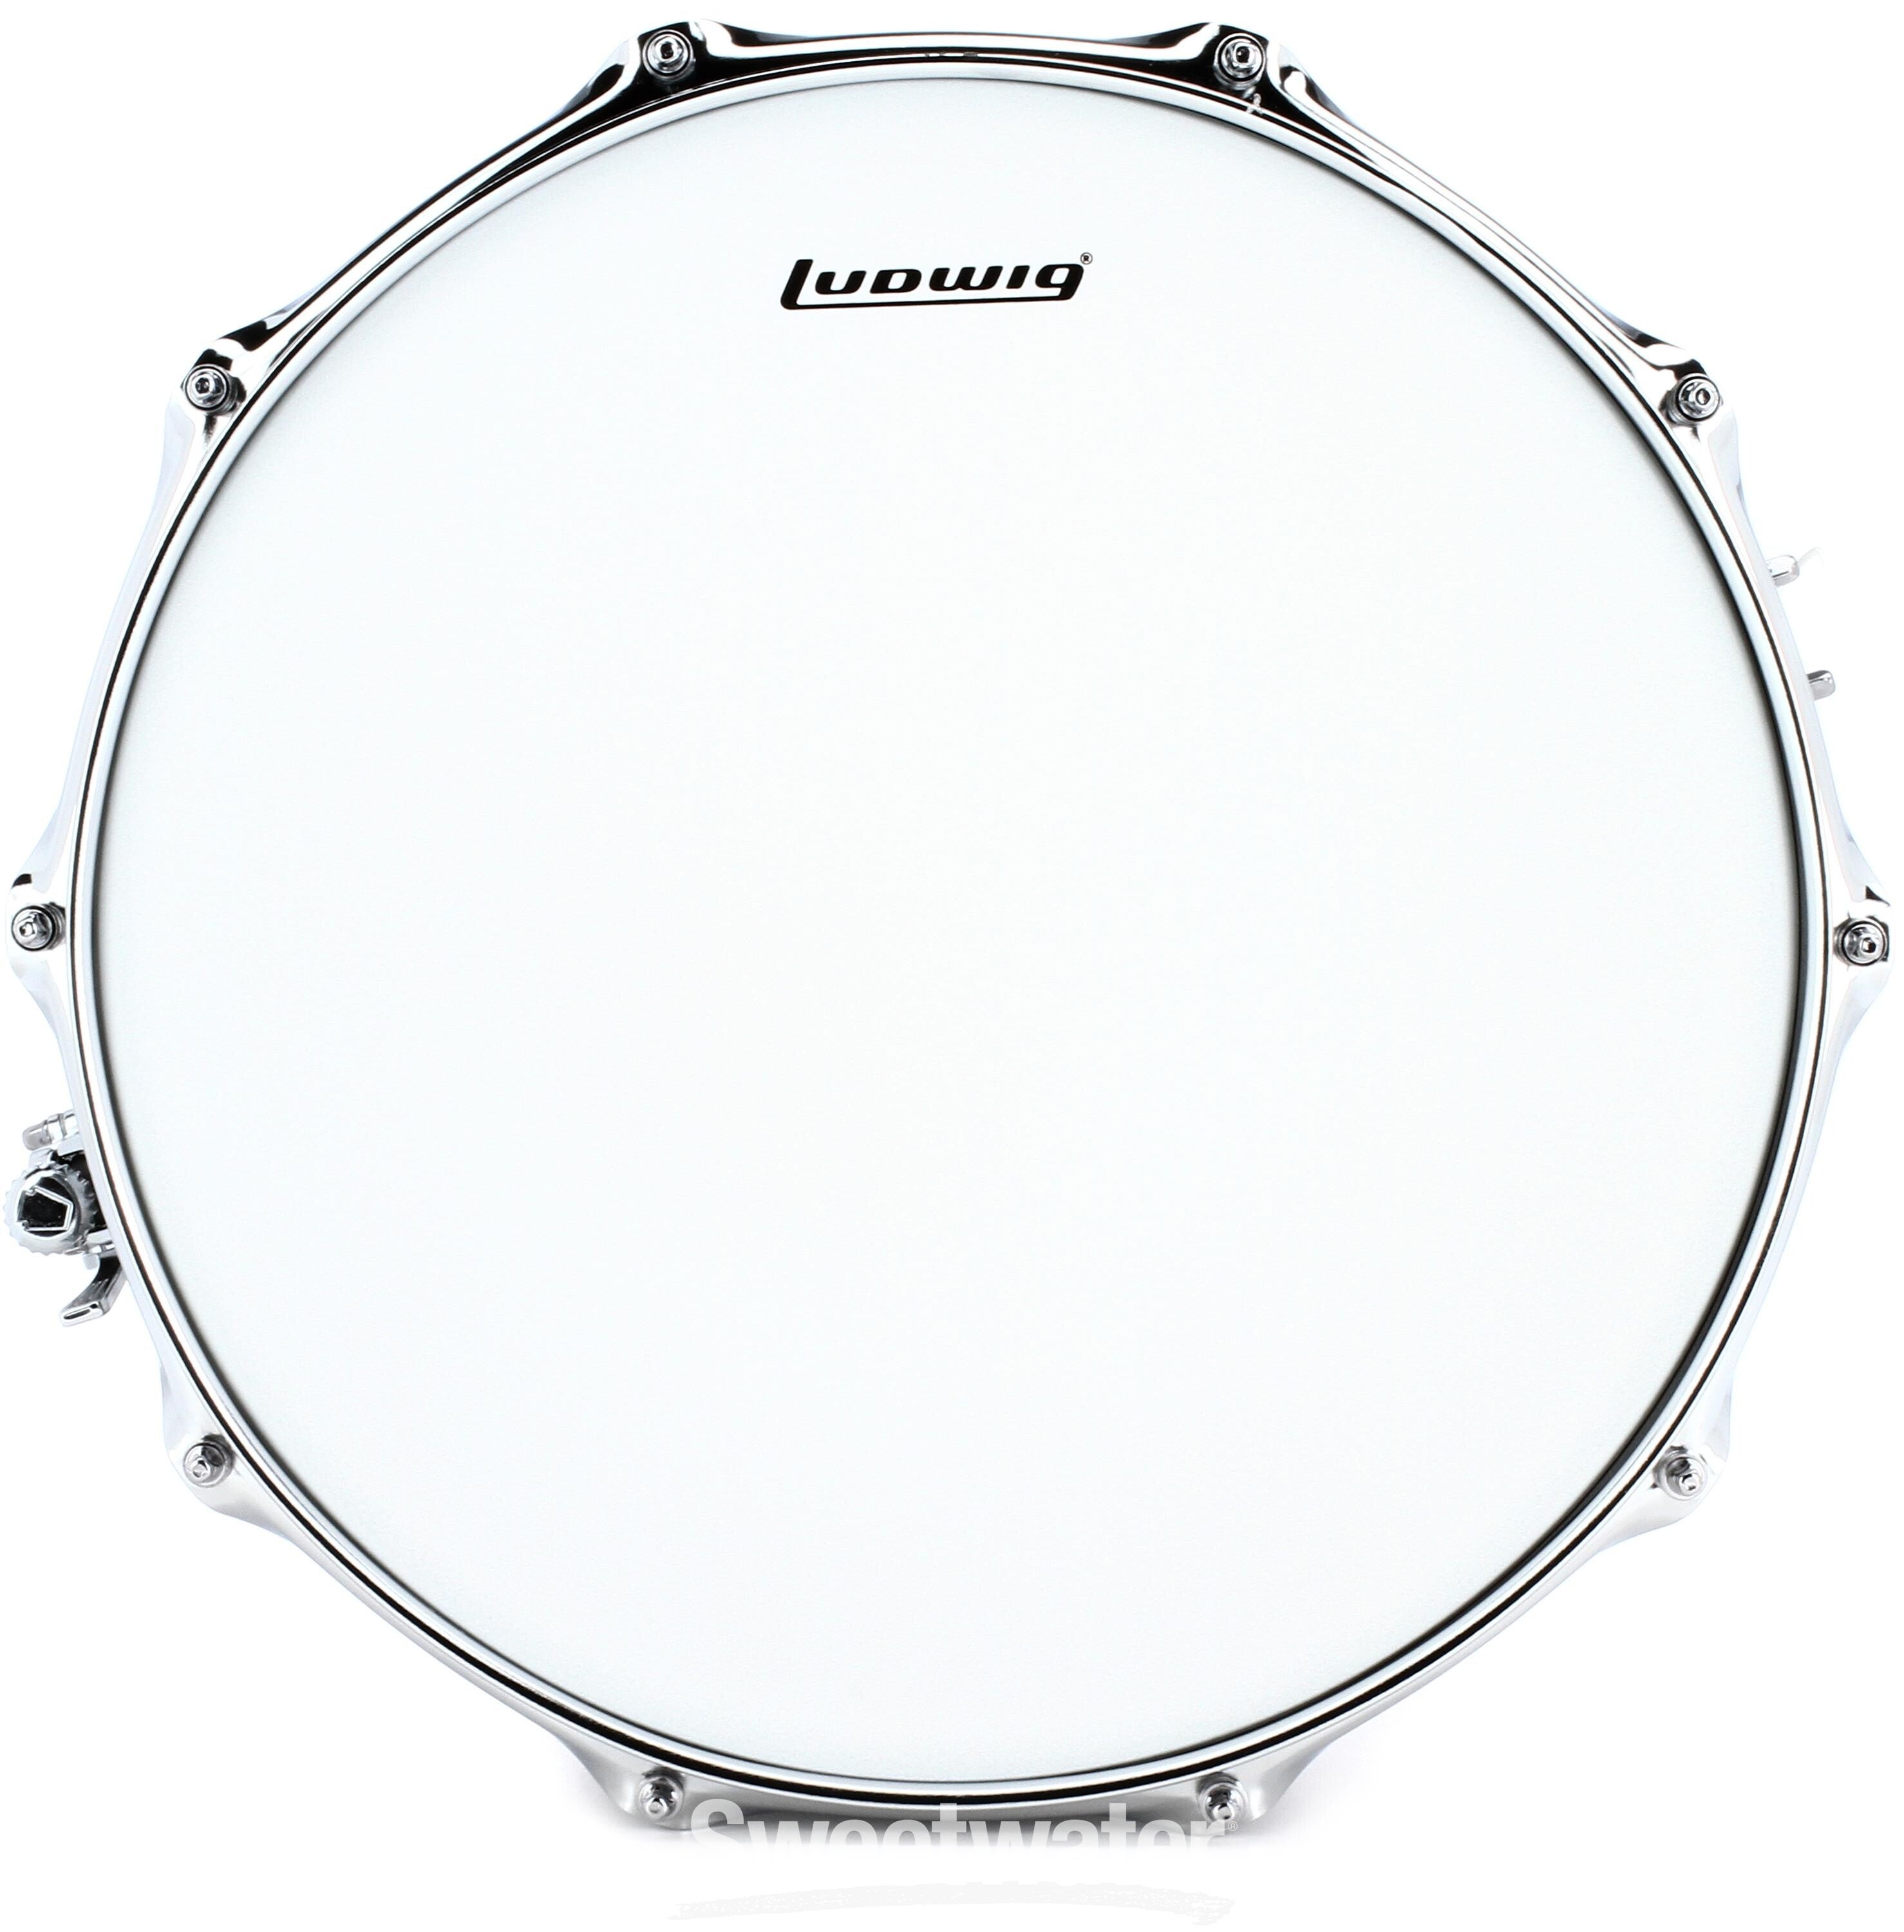 Ludwig Supralite Steel Snare Drum - 8 x 14-inch - Polished Reviews 